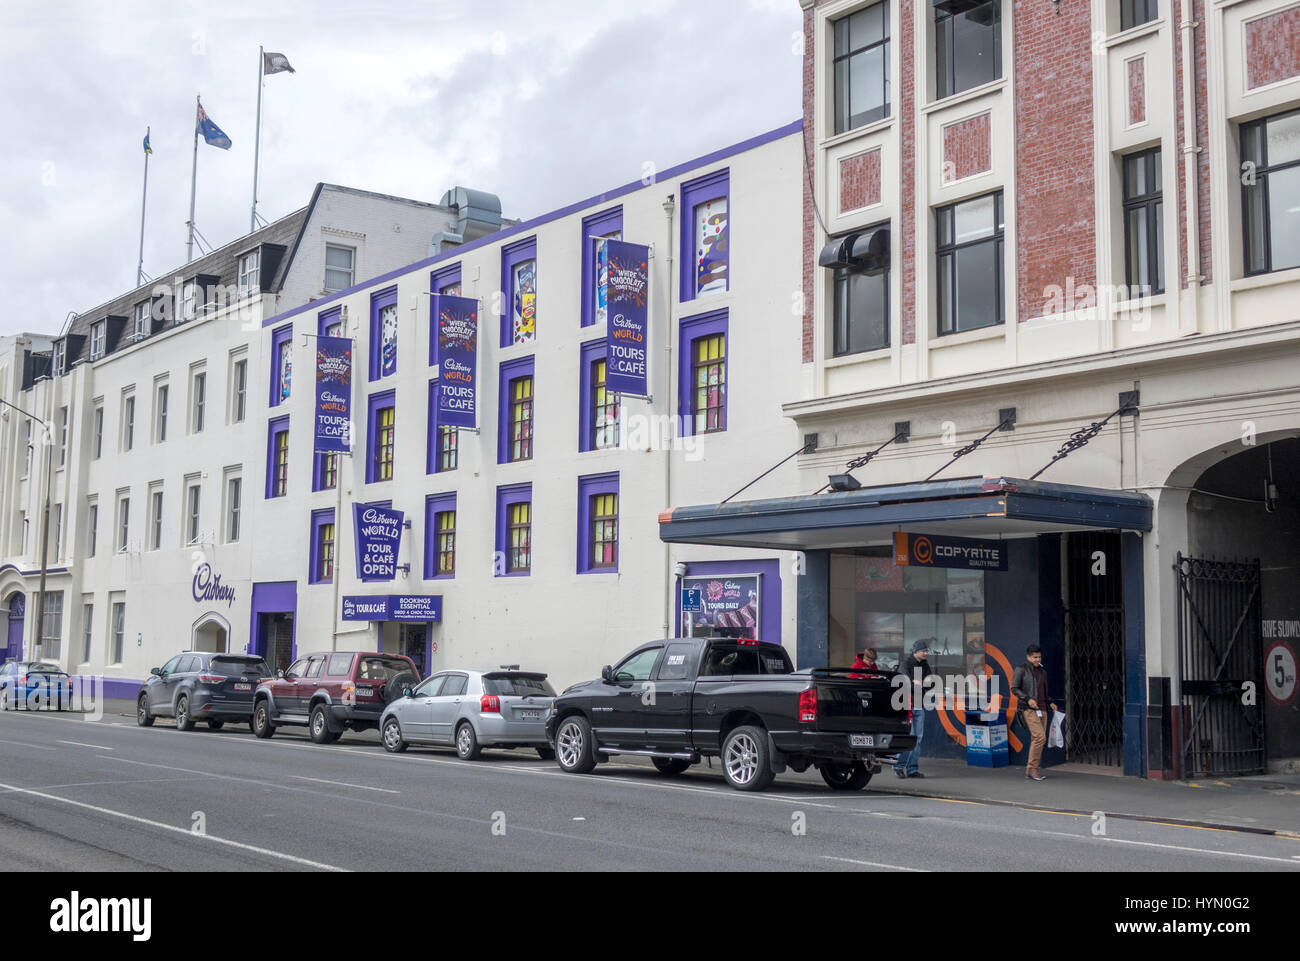 Cadbury Chocolate Factory And Cadbury World Tours And Cafe Building In Dunedin New Zealand, The Factory Is Slated To Close In 2017 Stock Photo